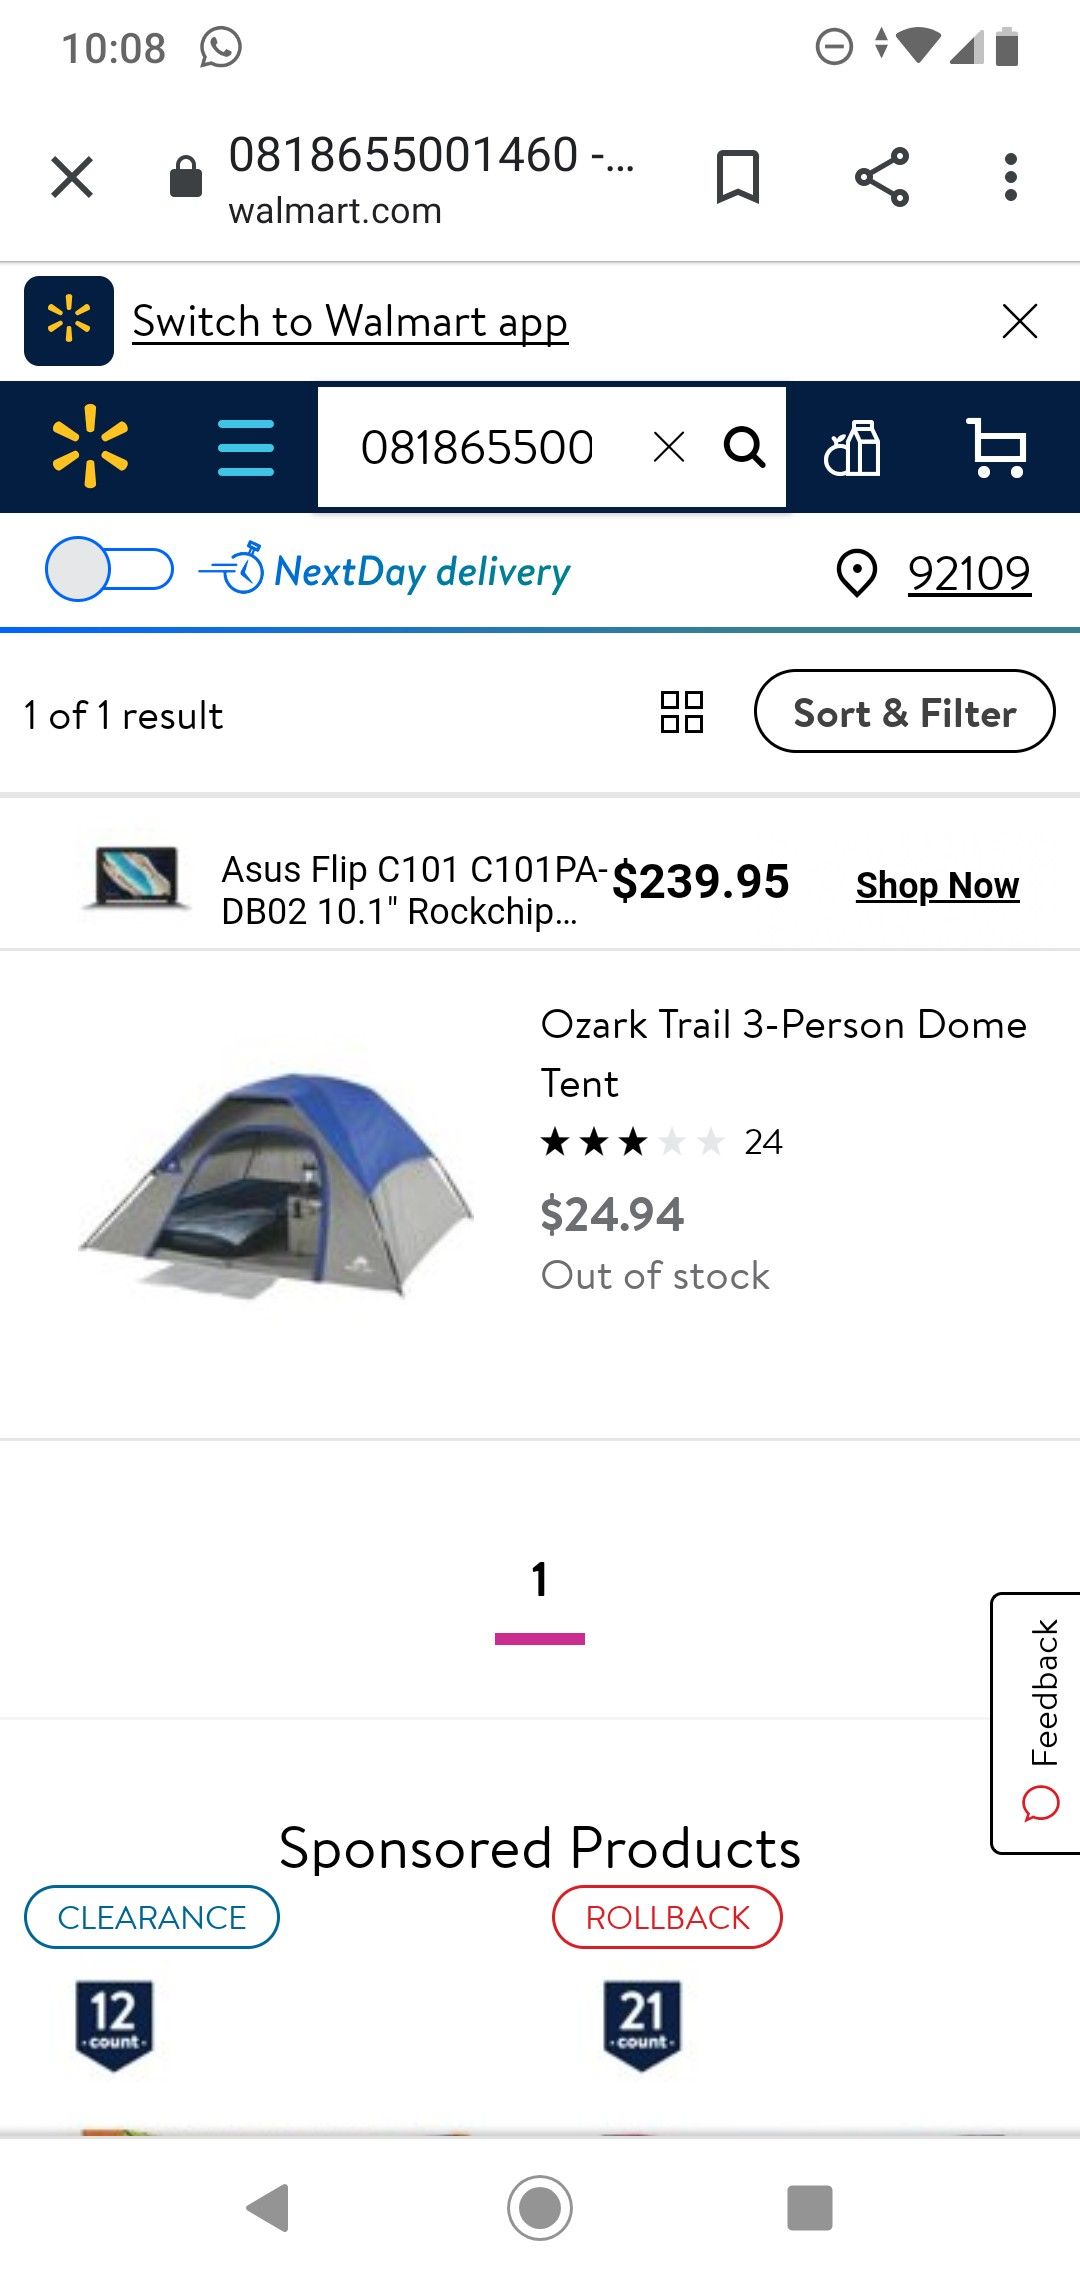 Ozark tent for 3 people